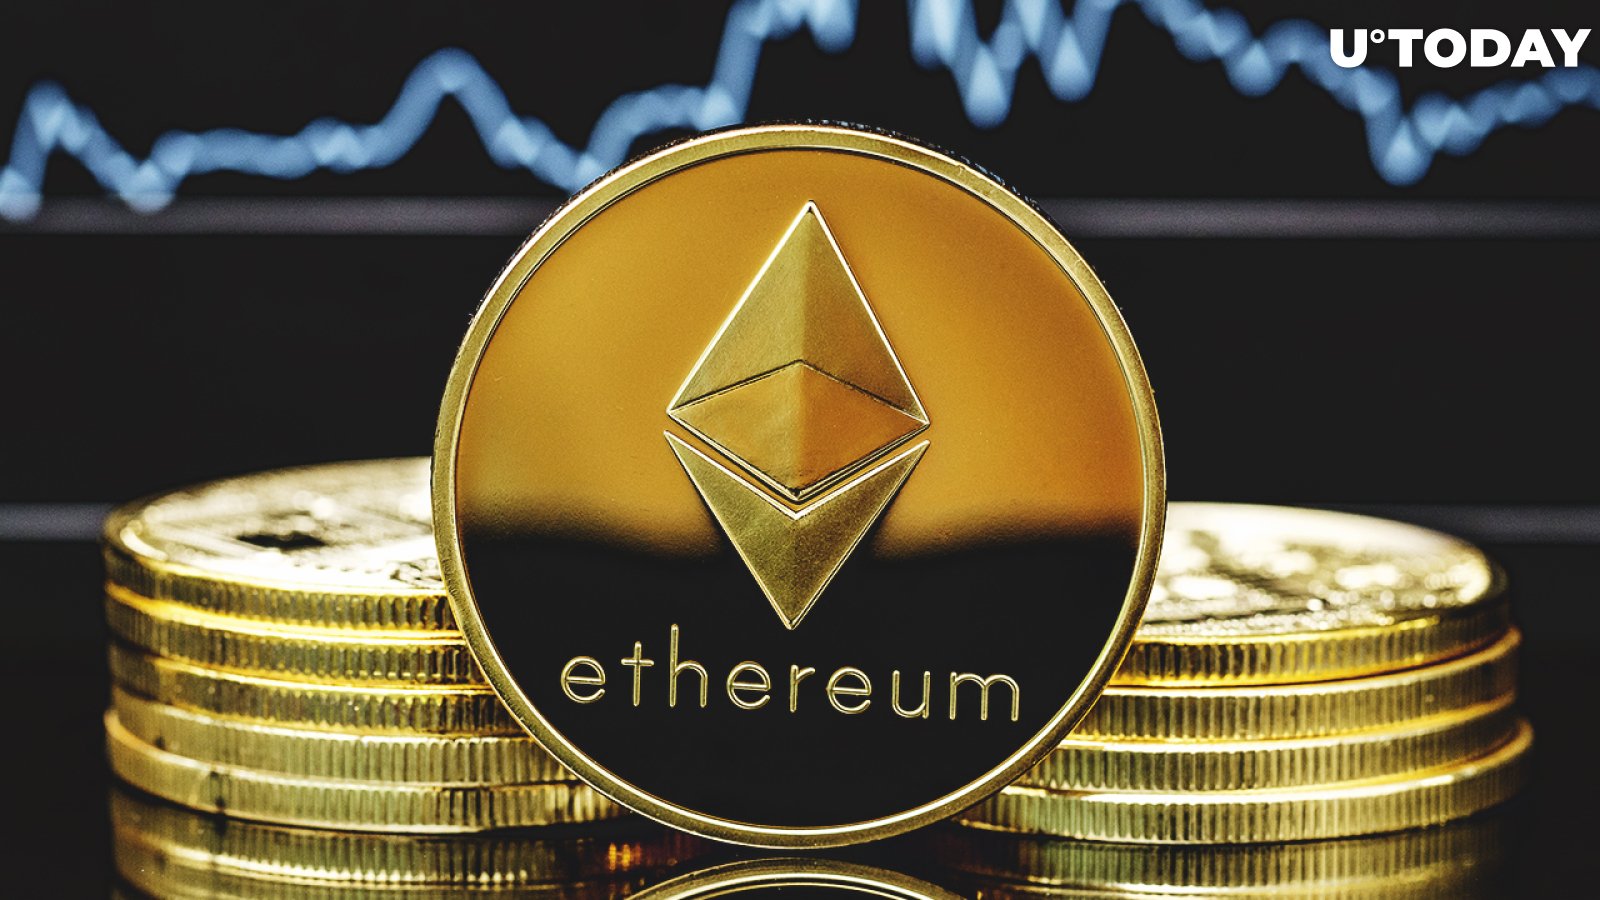 Here Might Be Something to Watch for on Ethereum Price as ETH Dips Under $2K: Santiment